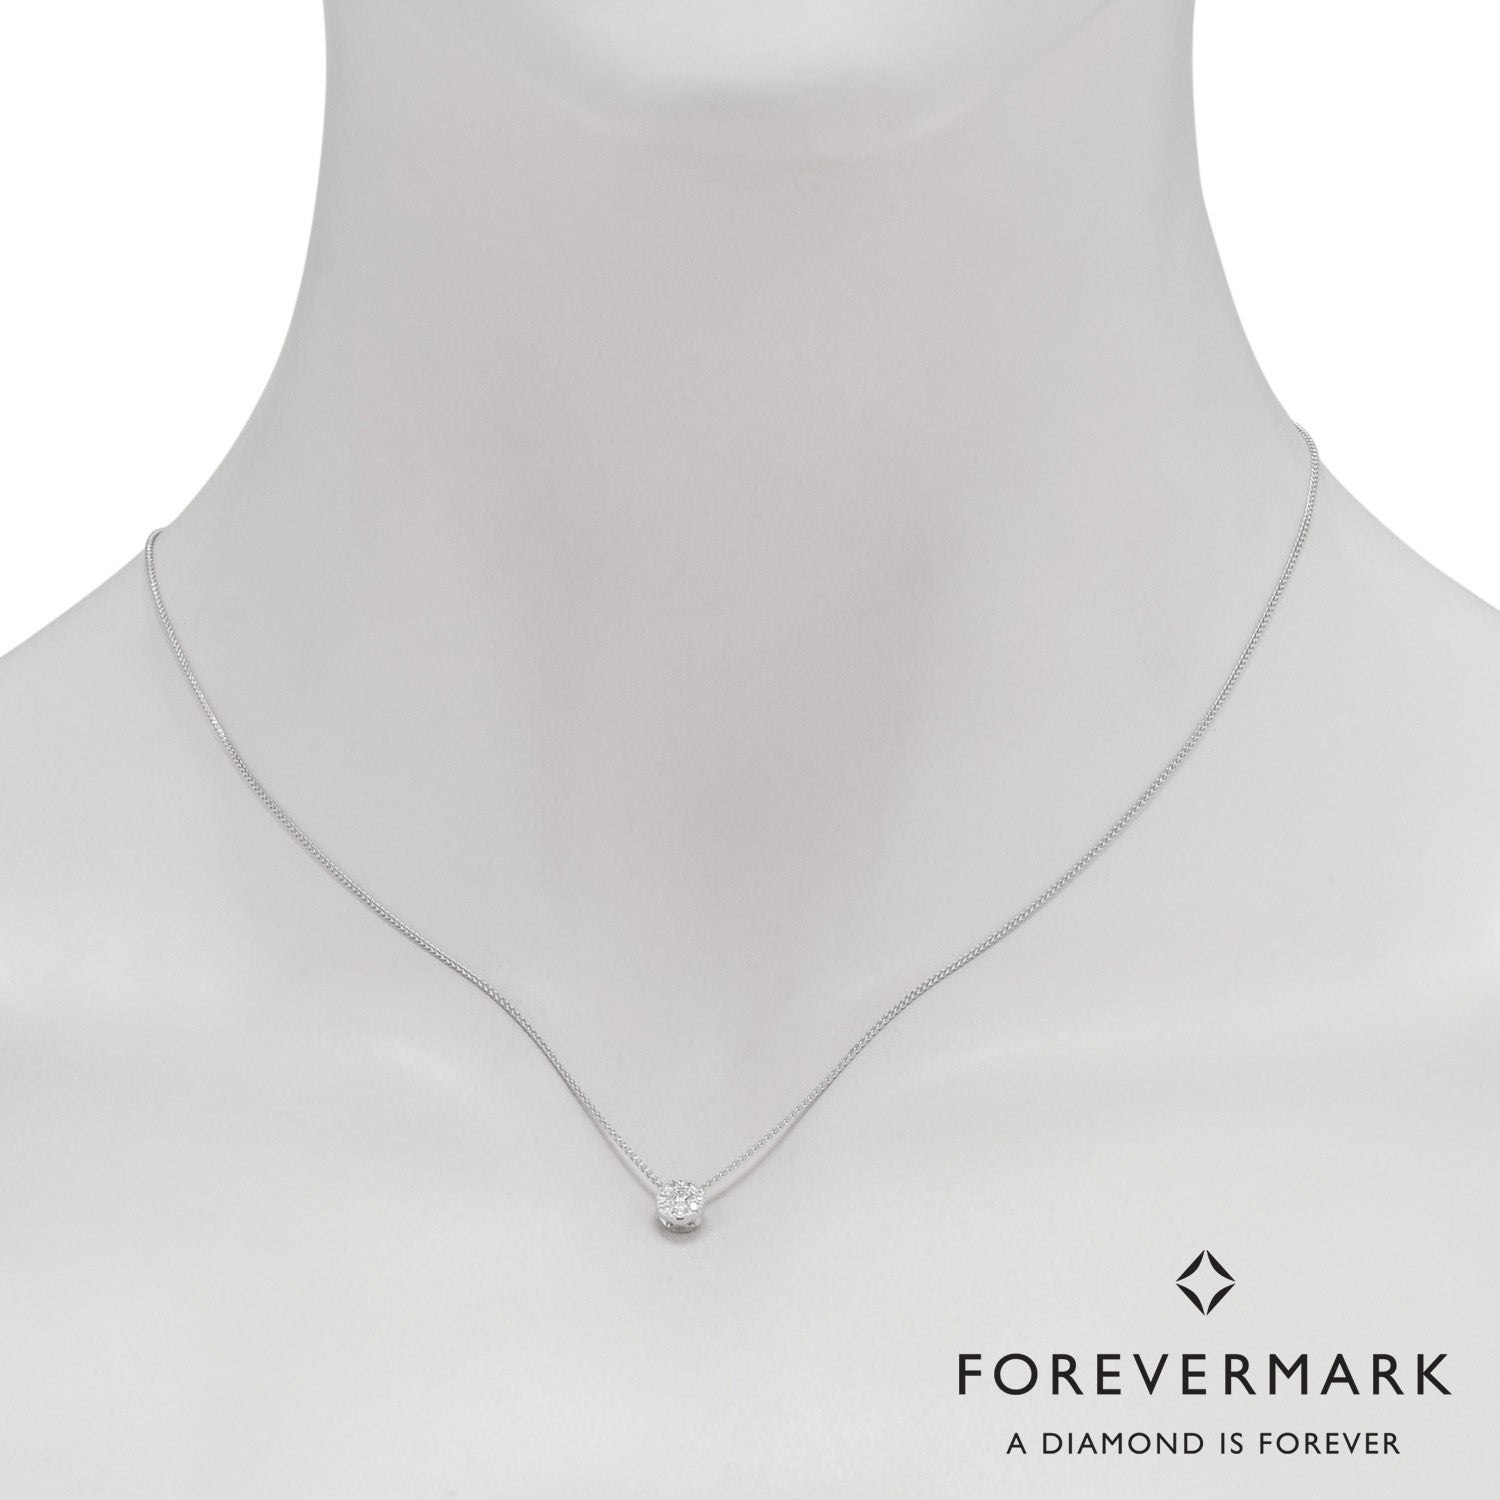 De Beers Forevermark Eternal Collection Diamond Halo Necklace in 18kt White Gold (1/5ct tw)